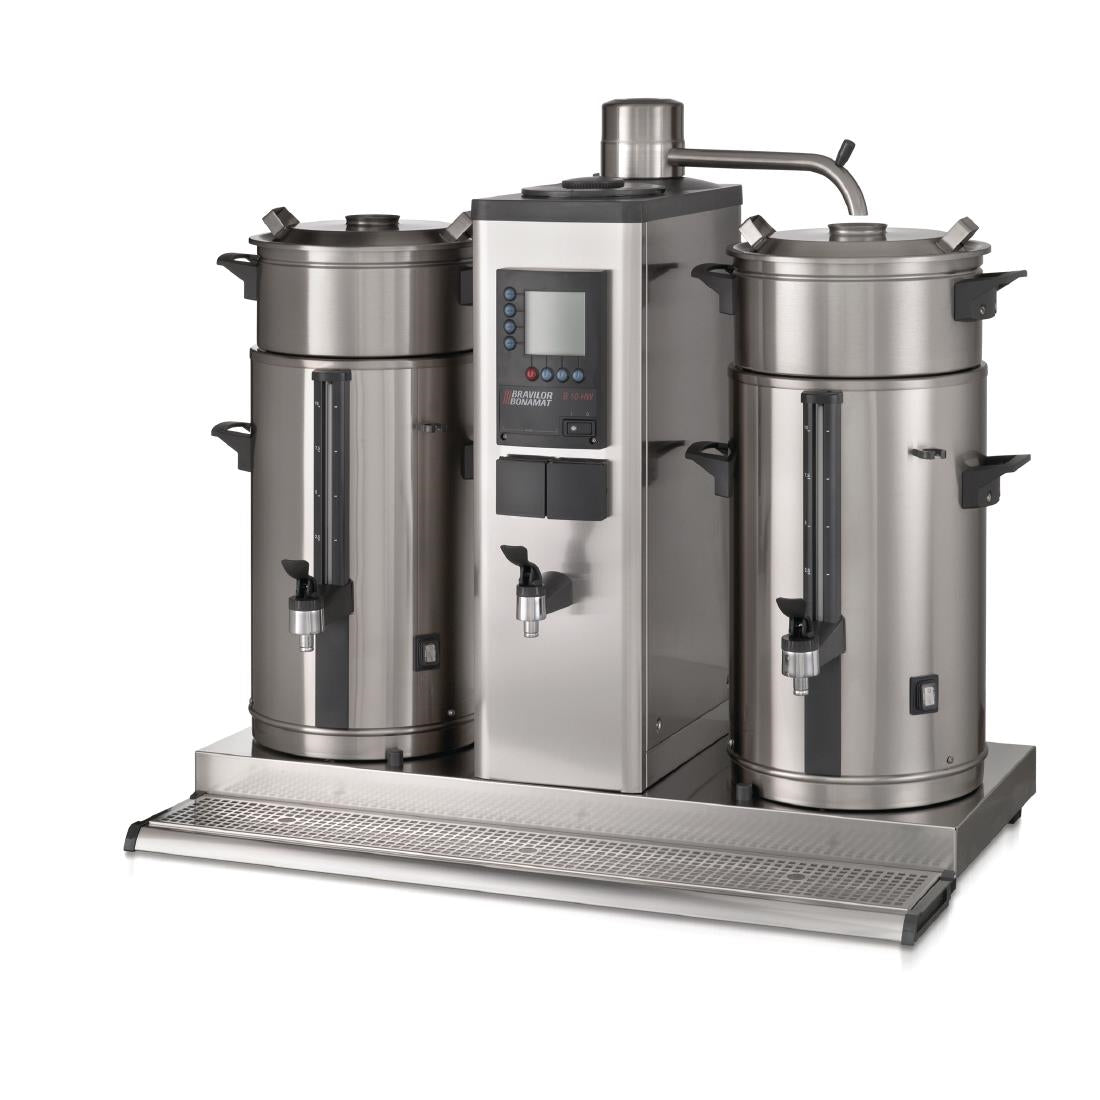 DC690-1P Bravilor B10 HW Bulk Coffee Brewer with 2x10Ltr Coffee Urns and Hot Water Tap JD Catering Equipment Solutions Ltd